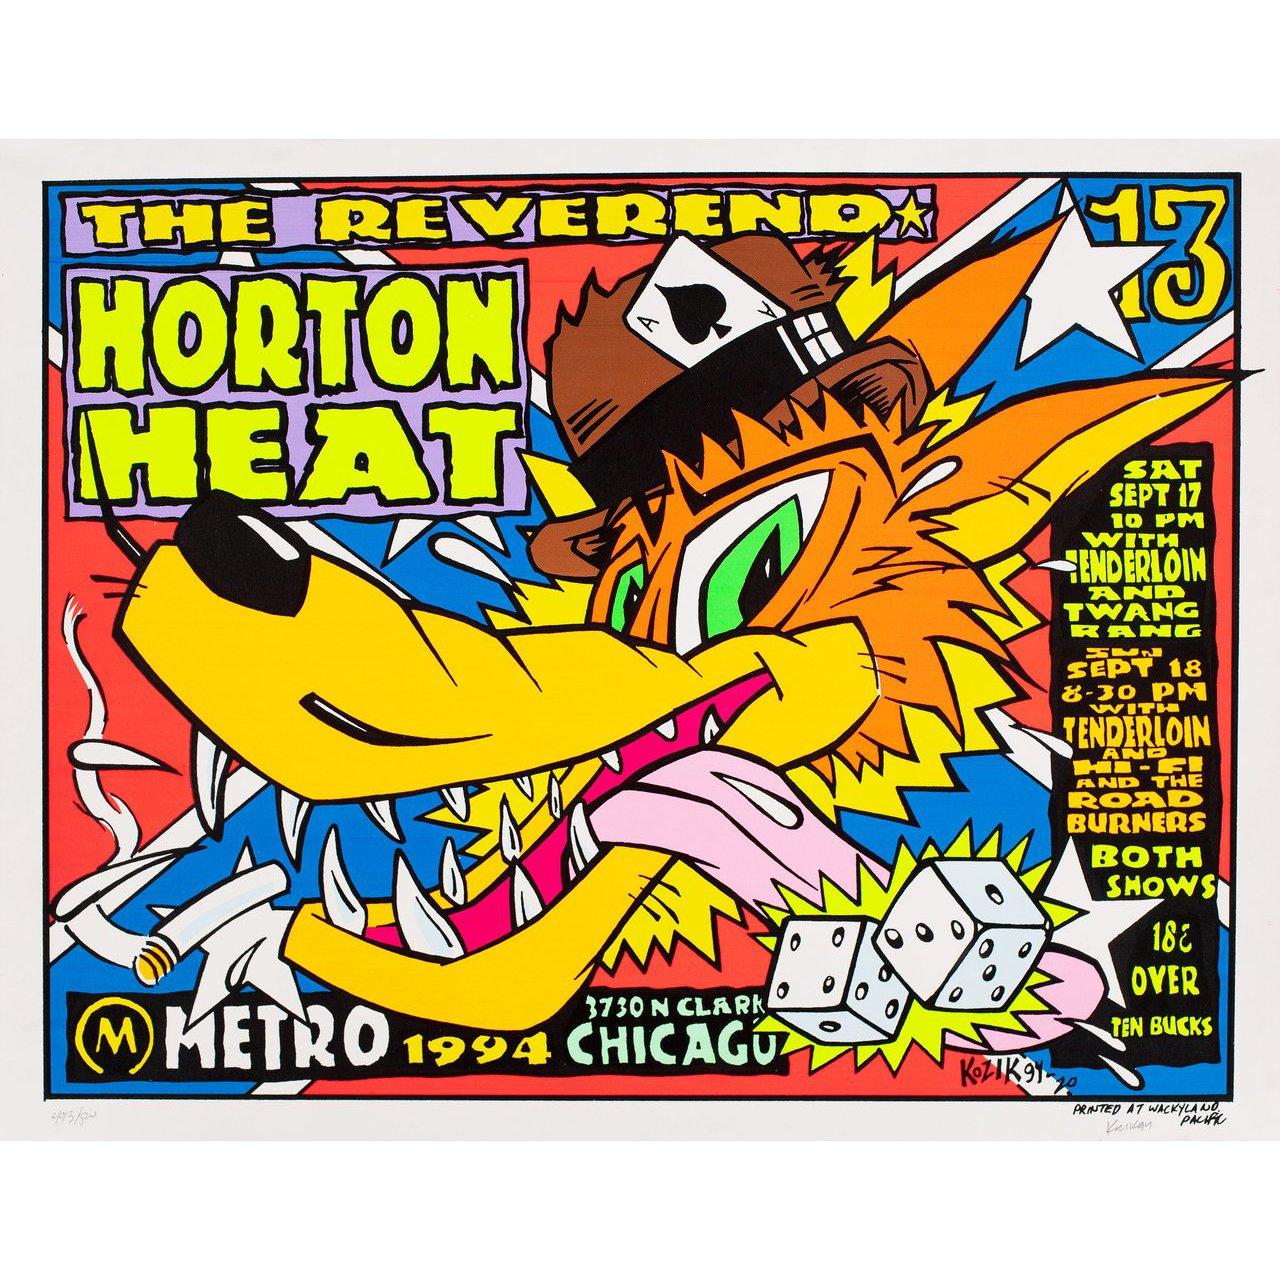 Original 1994 U.S. mini poster by Frank Kozik for The Reverand Horton Heat (1994). Signed by Frank Kozik. Very Good-Fine condition, rolled. Please note: the size is stated in inches and the actual size can vary by an inch or more.
